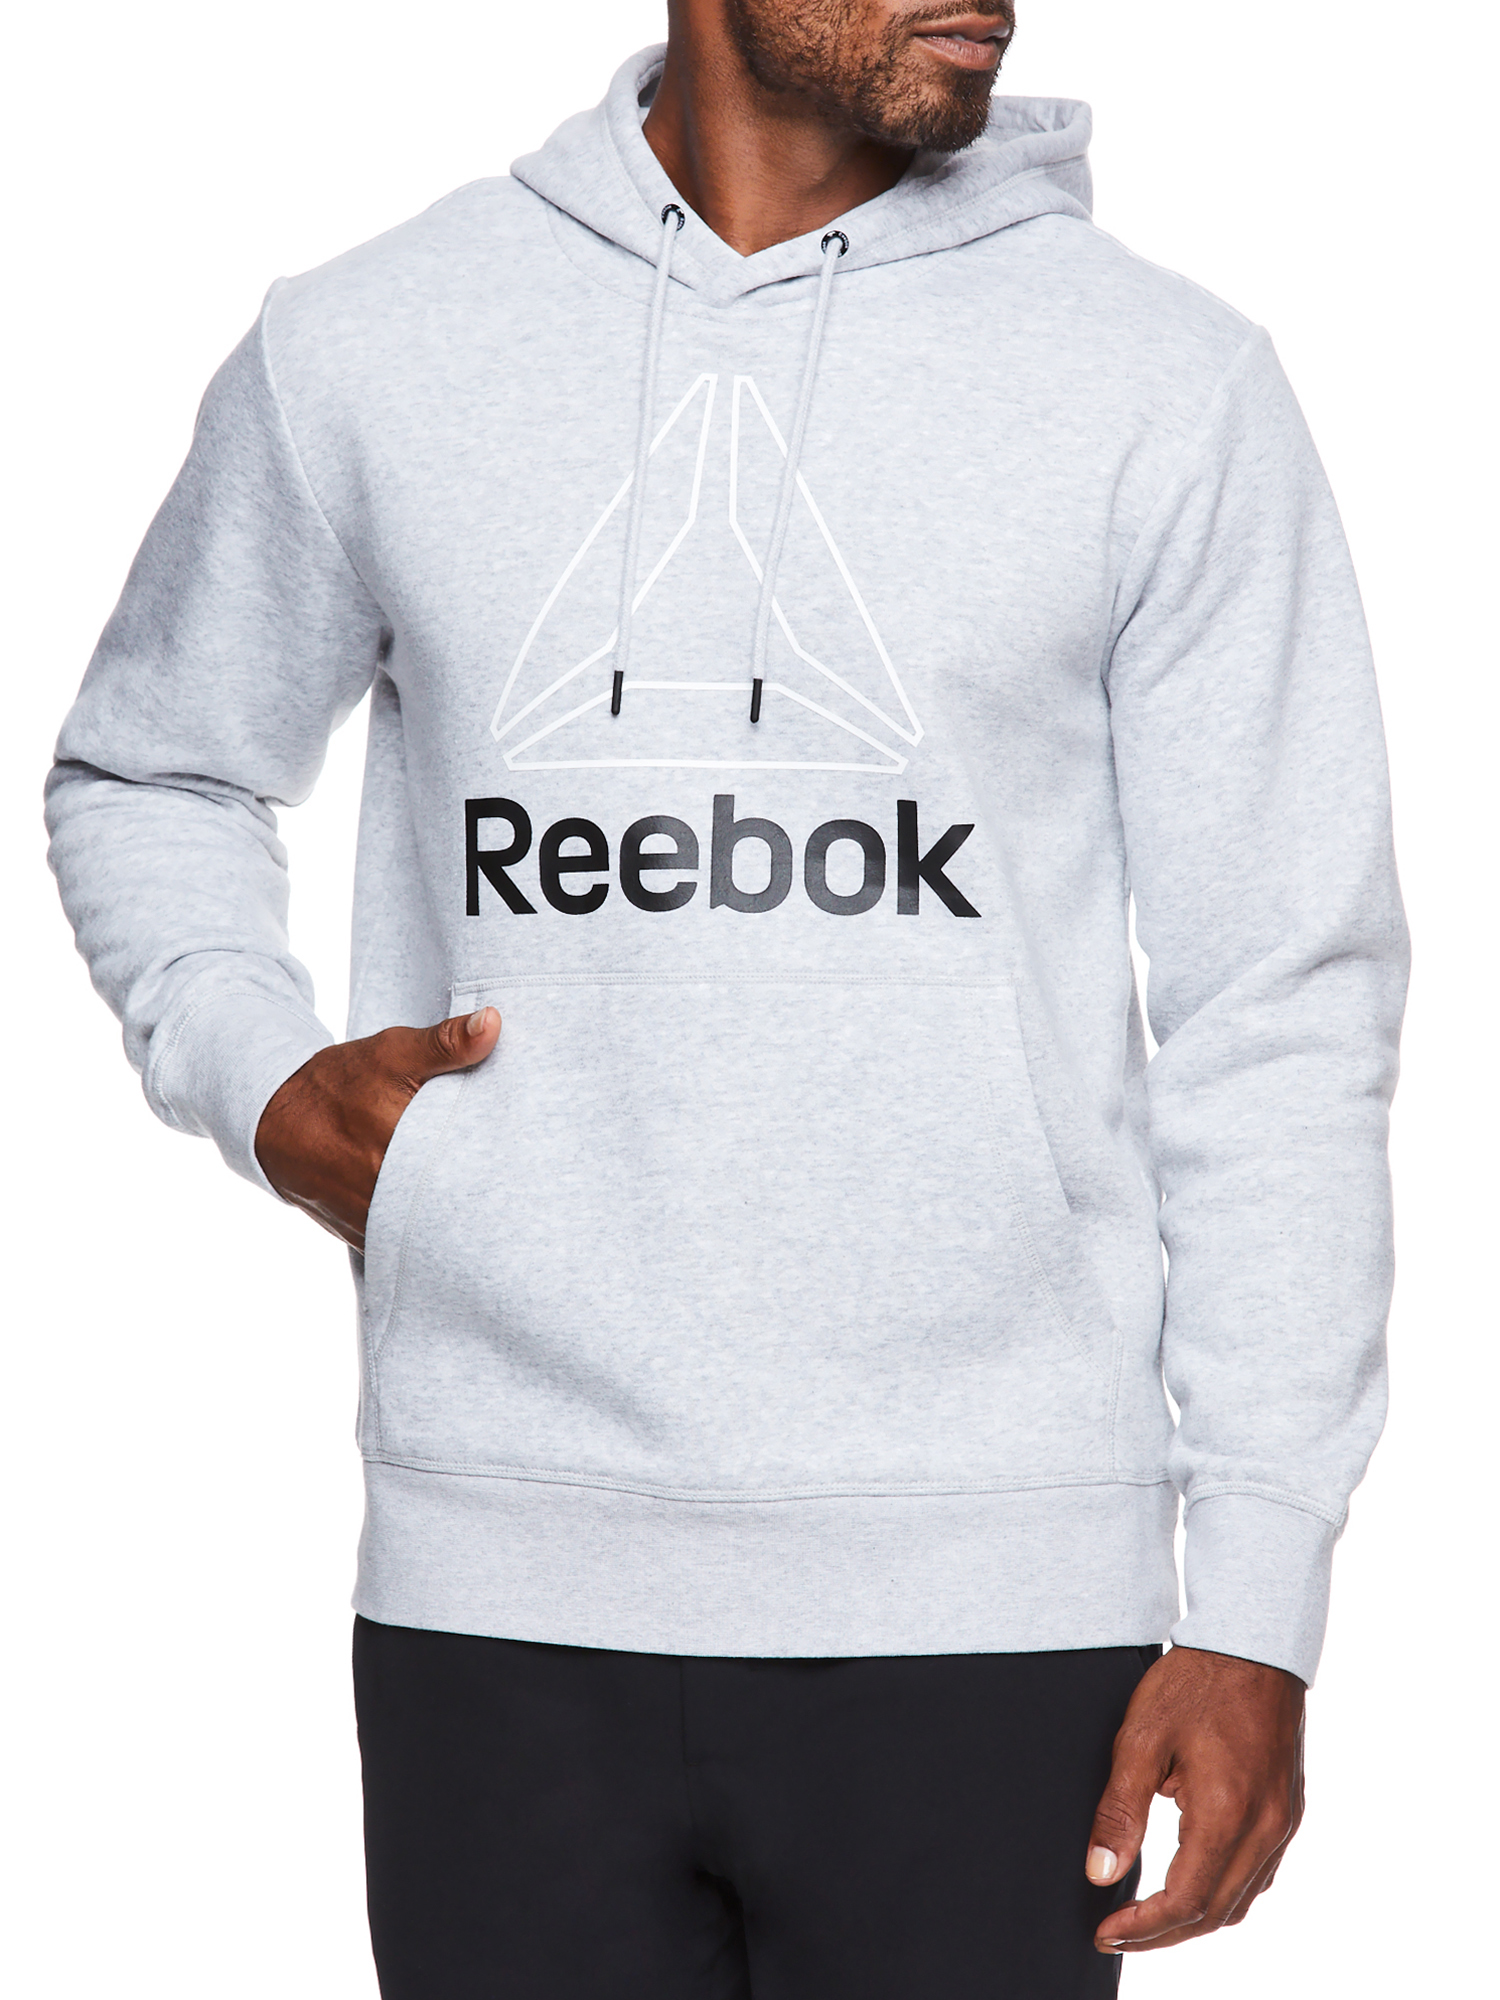 Reebok Mens and Big Mens Active Pullover Fleece Hoodie, Up to 3XL - image 1 of 5